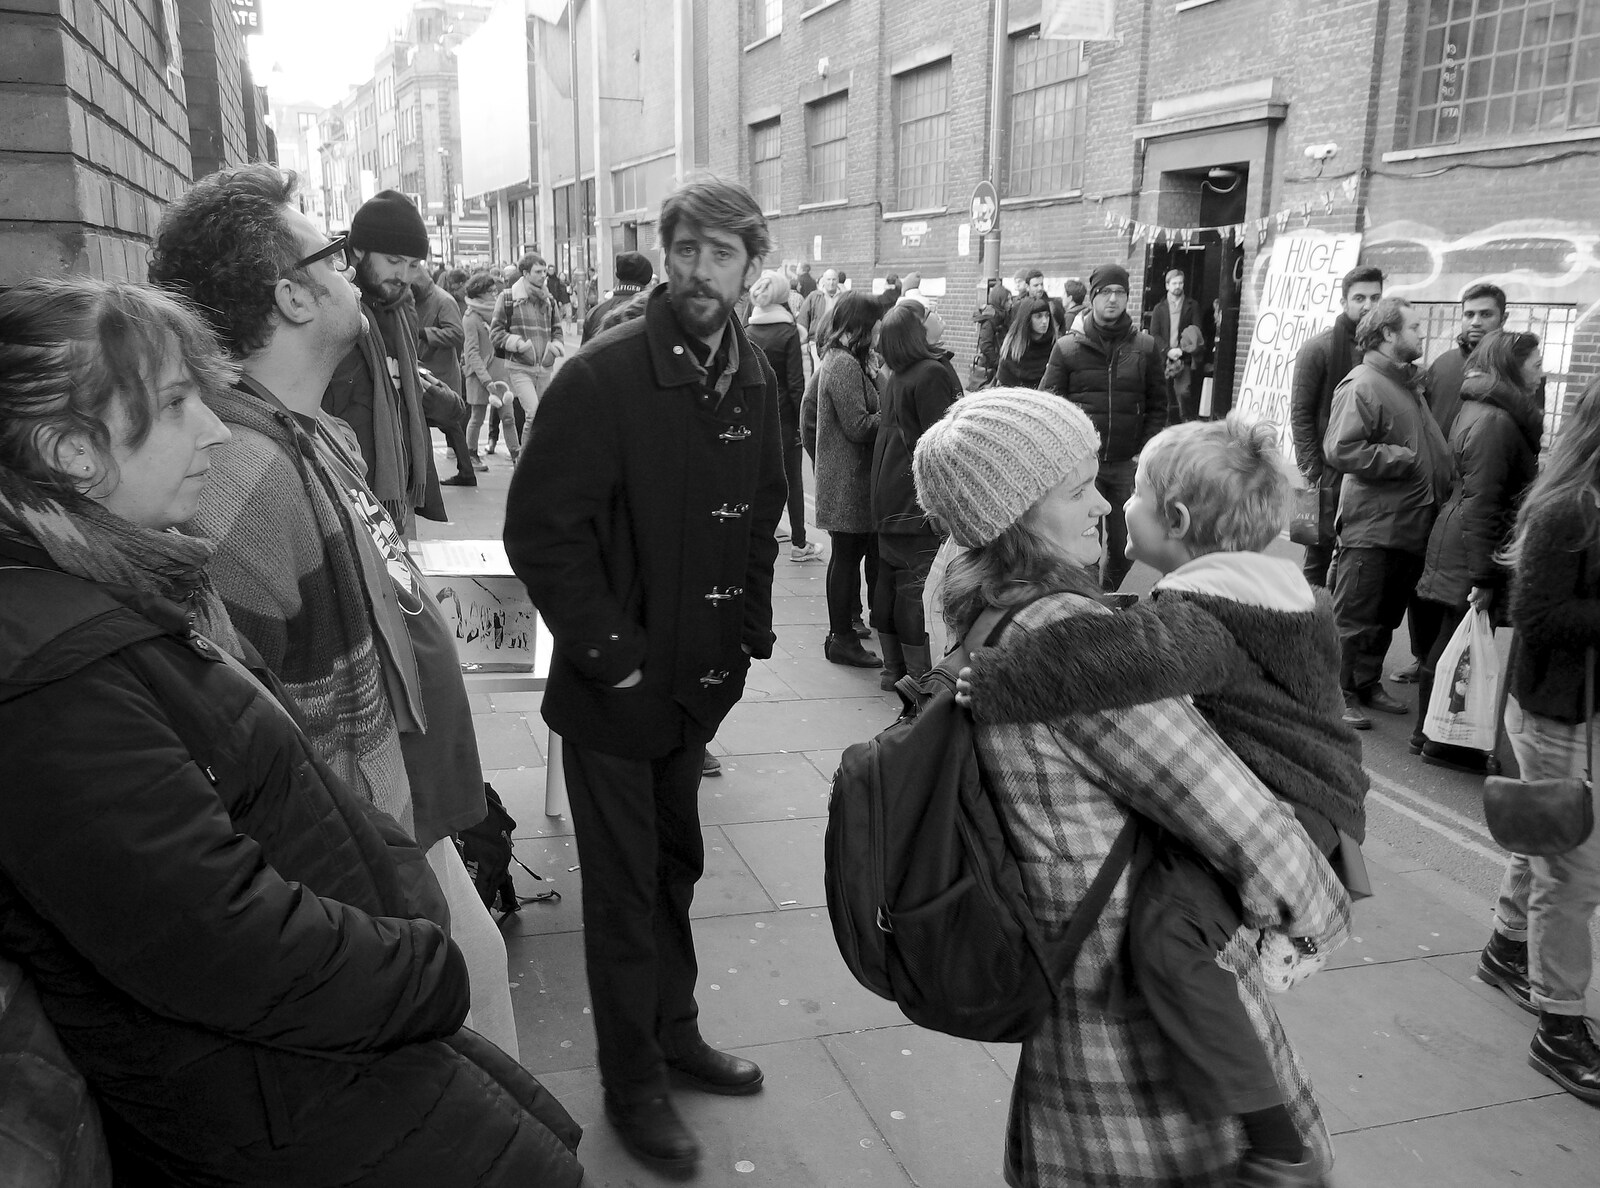 Jilly, Noddy, Kiwi Mick, Isobel and Fred from Lunch in the East End, Spitalfields and Brick Lane, London - 1st December 2013